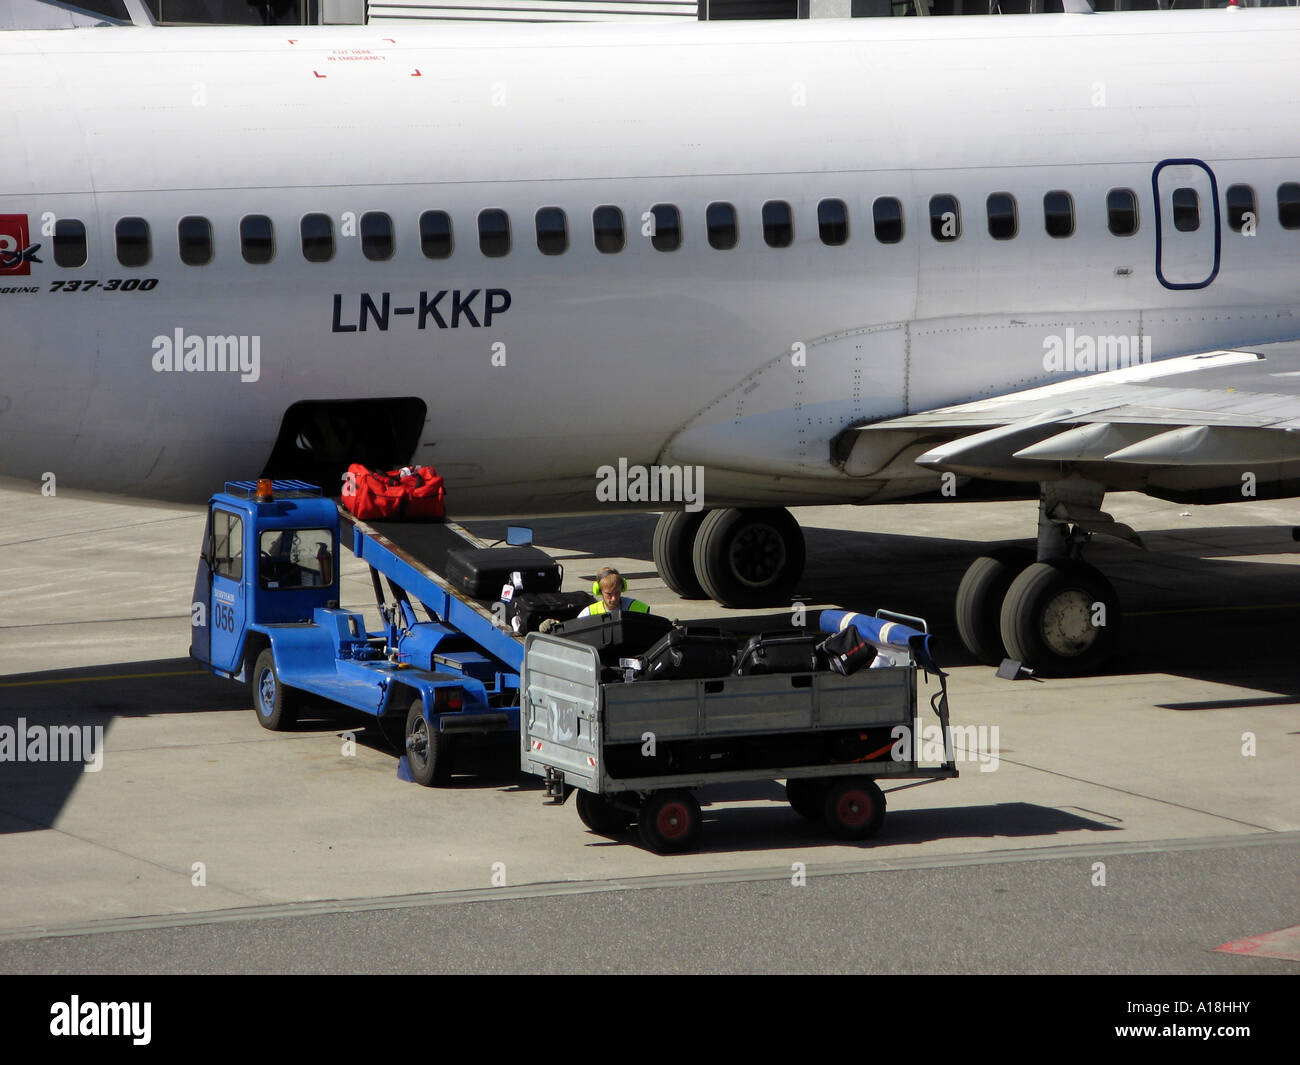 Loading baggage into air plane at Oslo Airport Gardermoen, OSL, located in Ullensaker, Norway Stock Photo